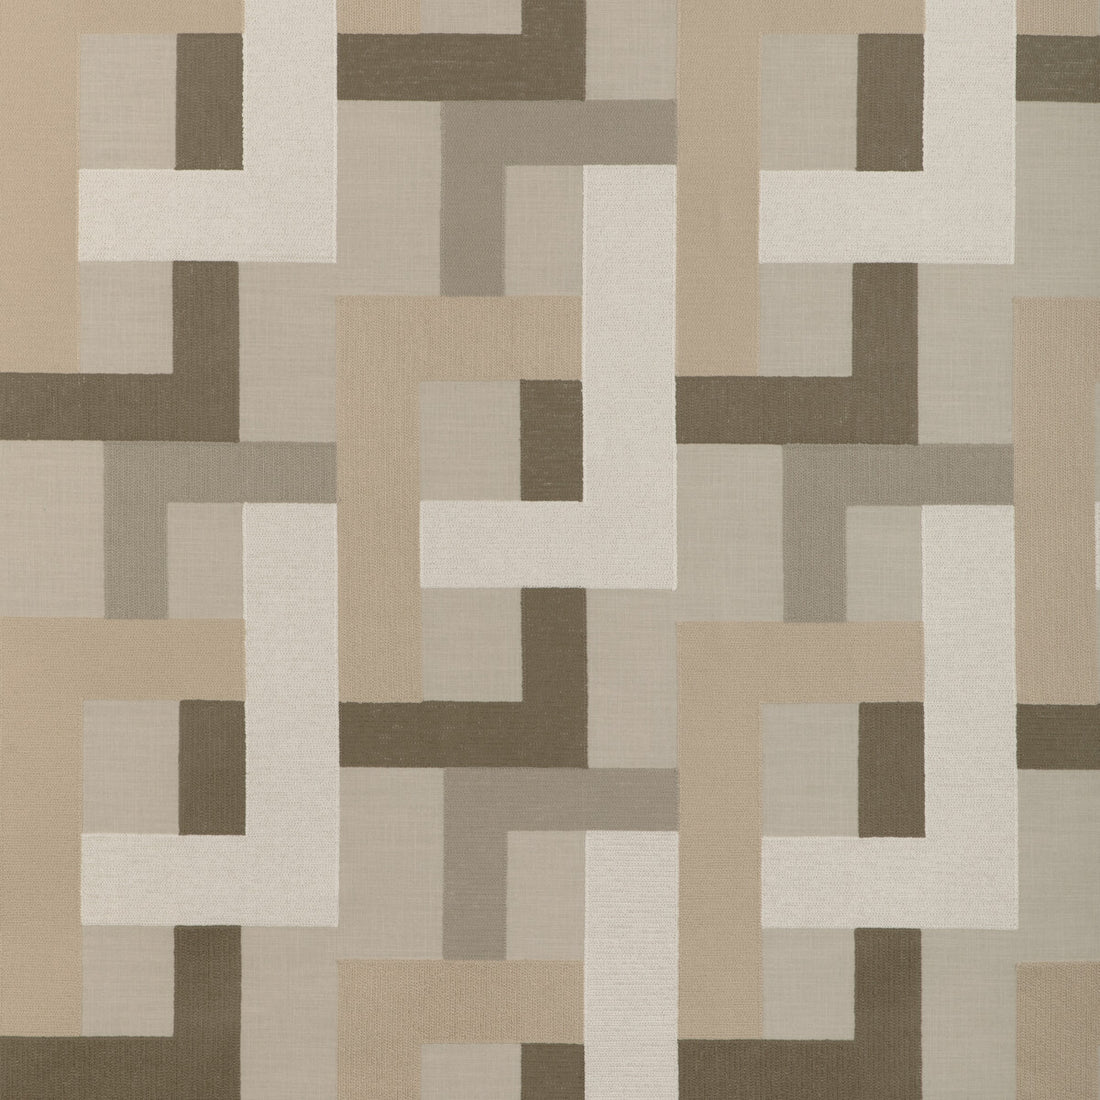 Farnsworth fabric in camel color - pattern 90009.16.0 - by Kravet Basics in the Mid-Century Modern collection